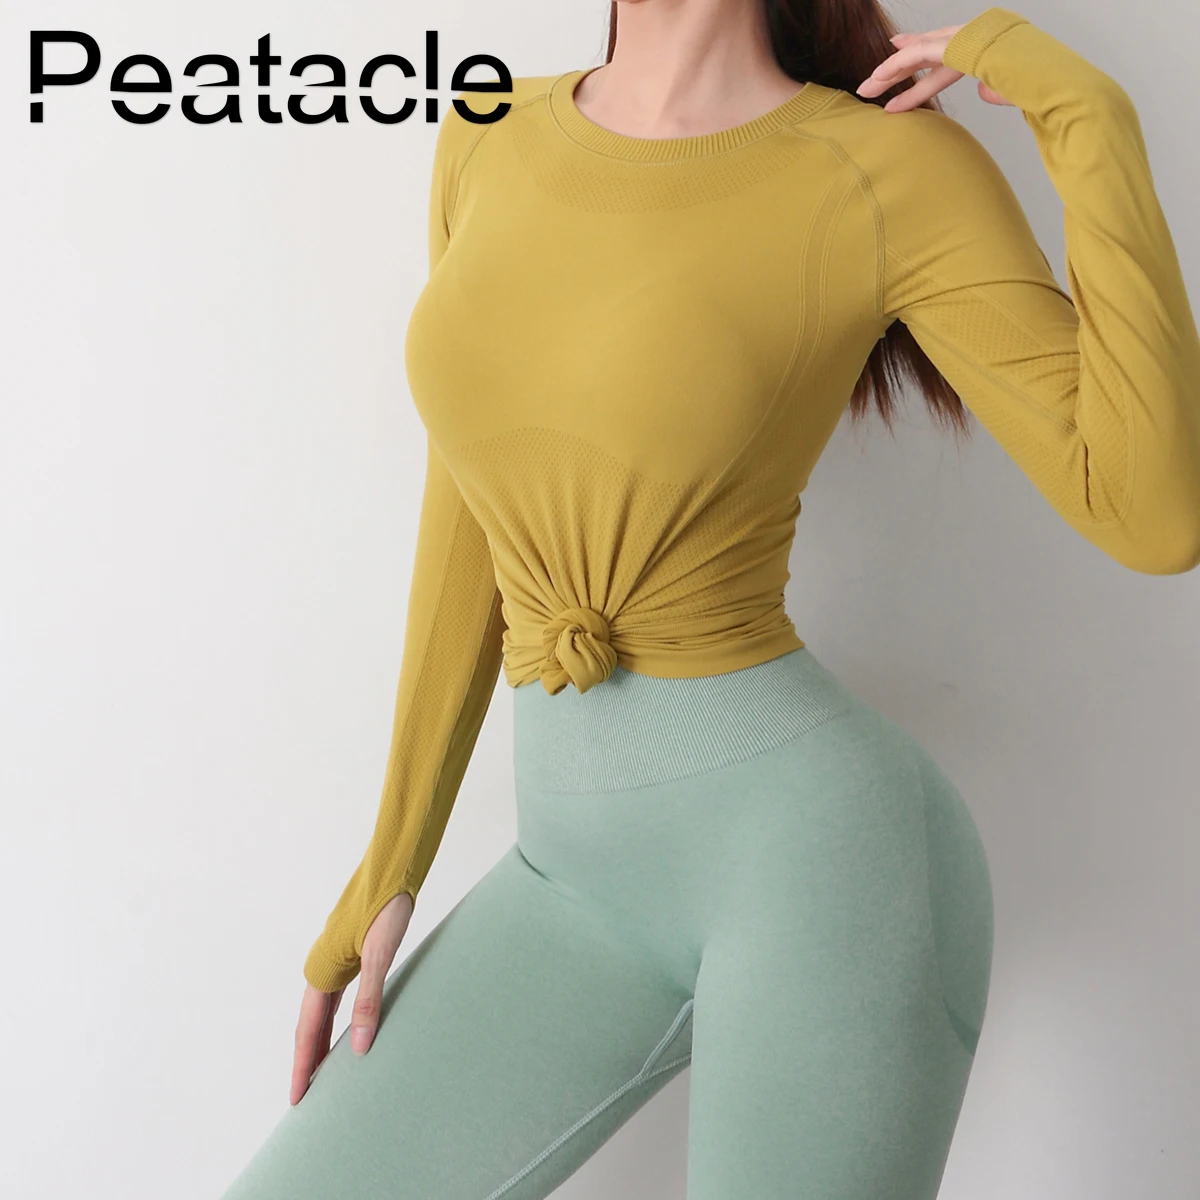 

Peatacle Sport T-shirt Women's Tight-fitting Stretchy Quick Dry Running Long Sleeve Fitness Clothes Yoga Training Top